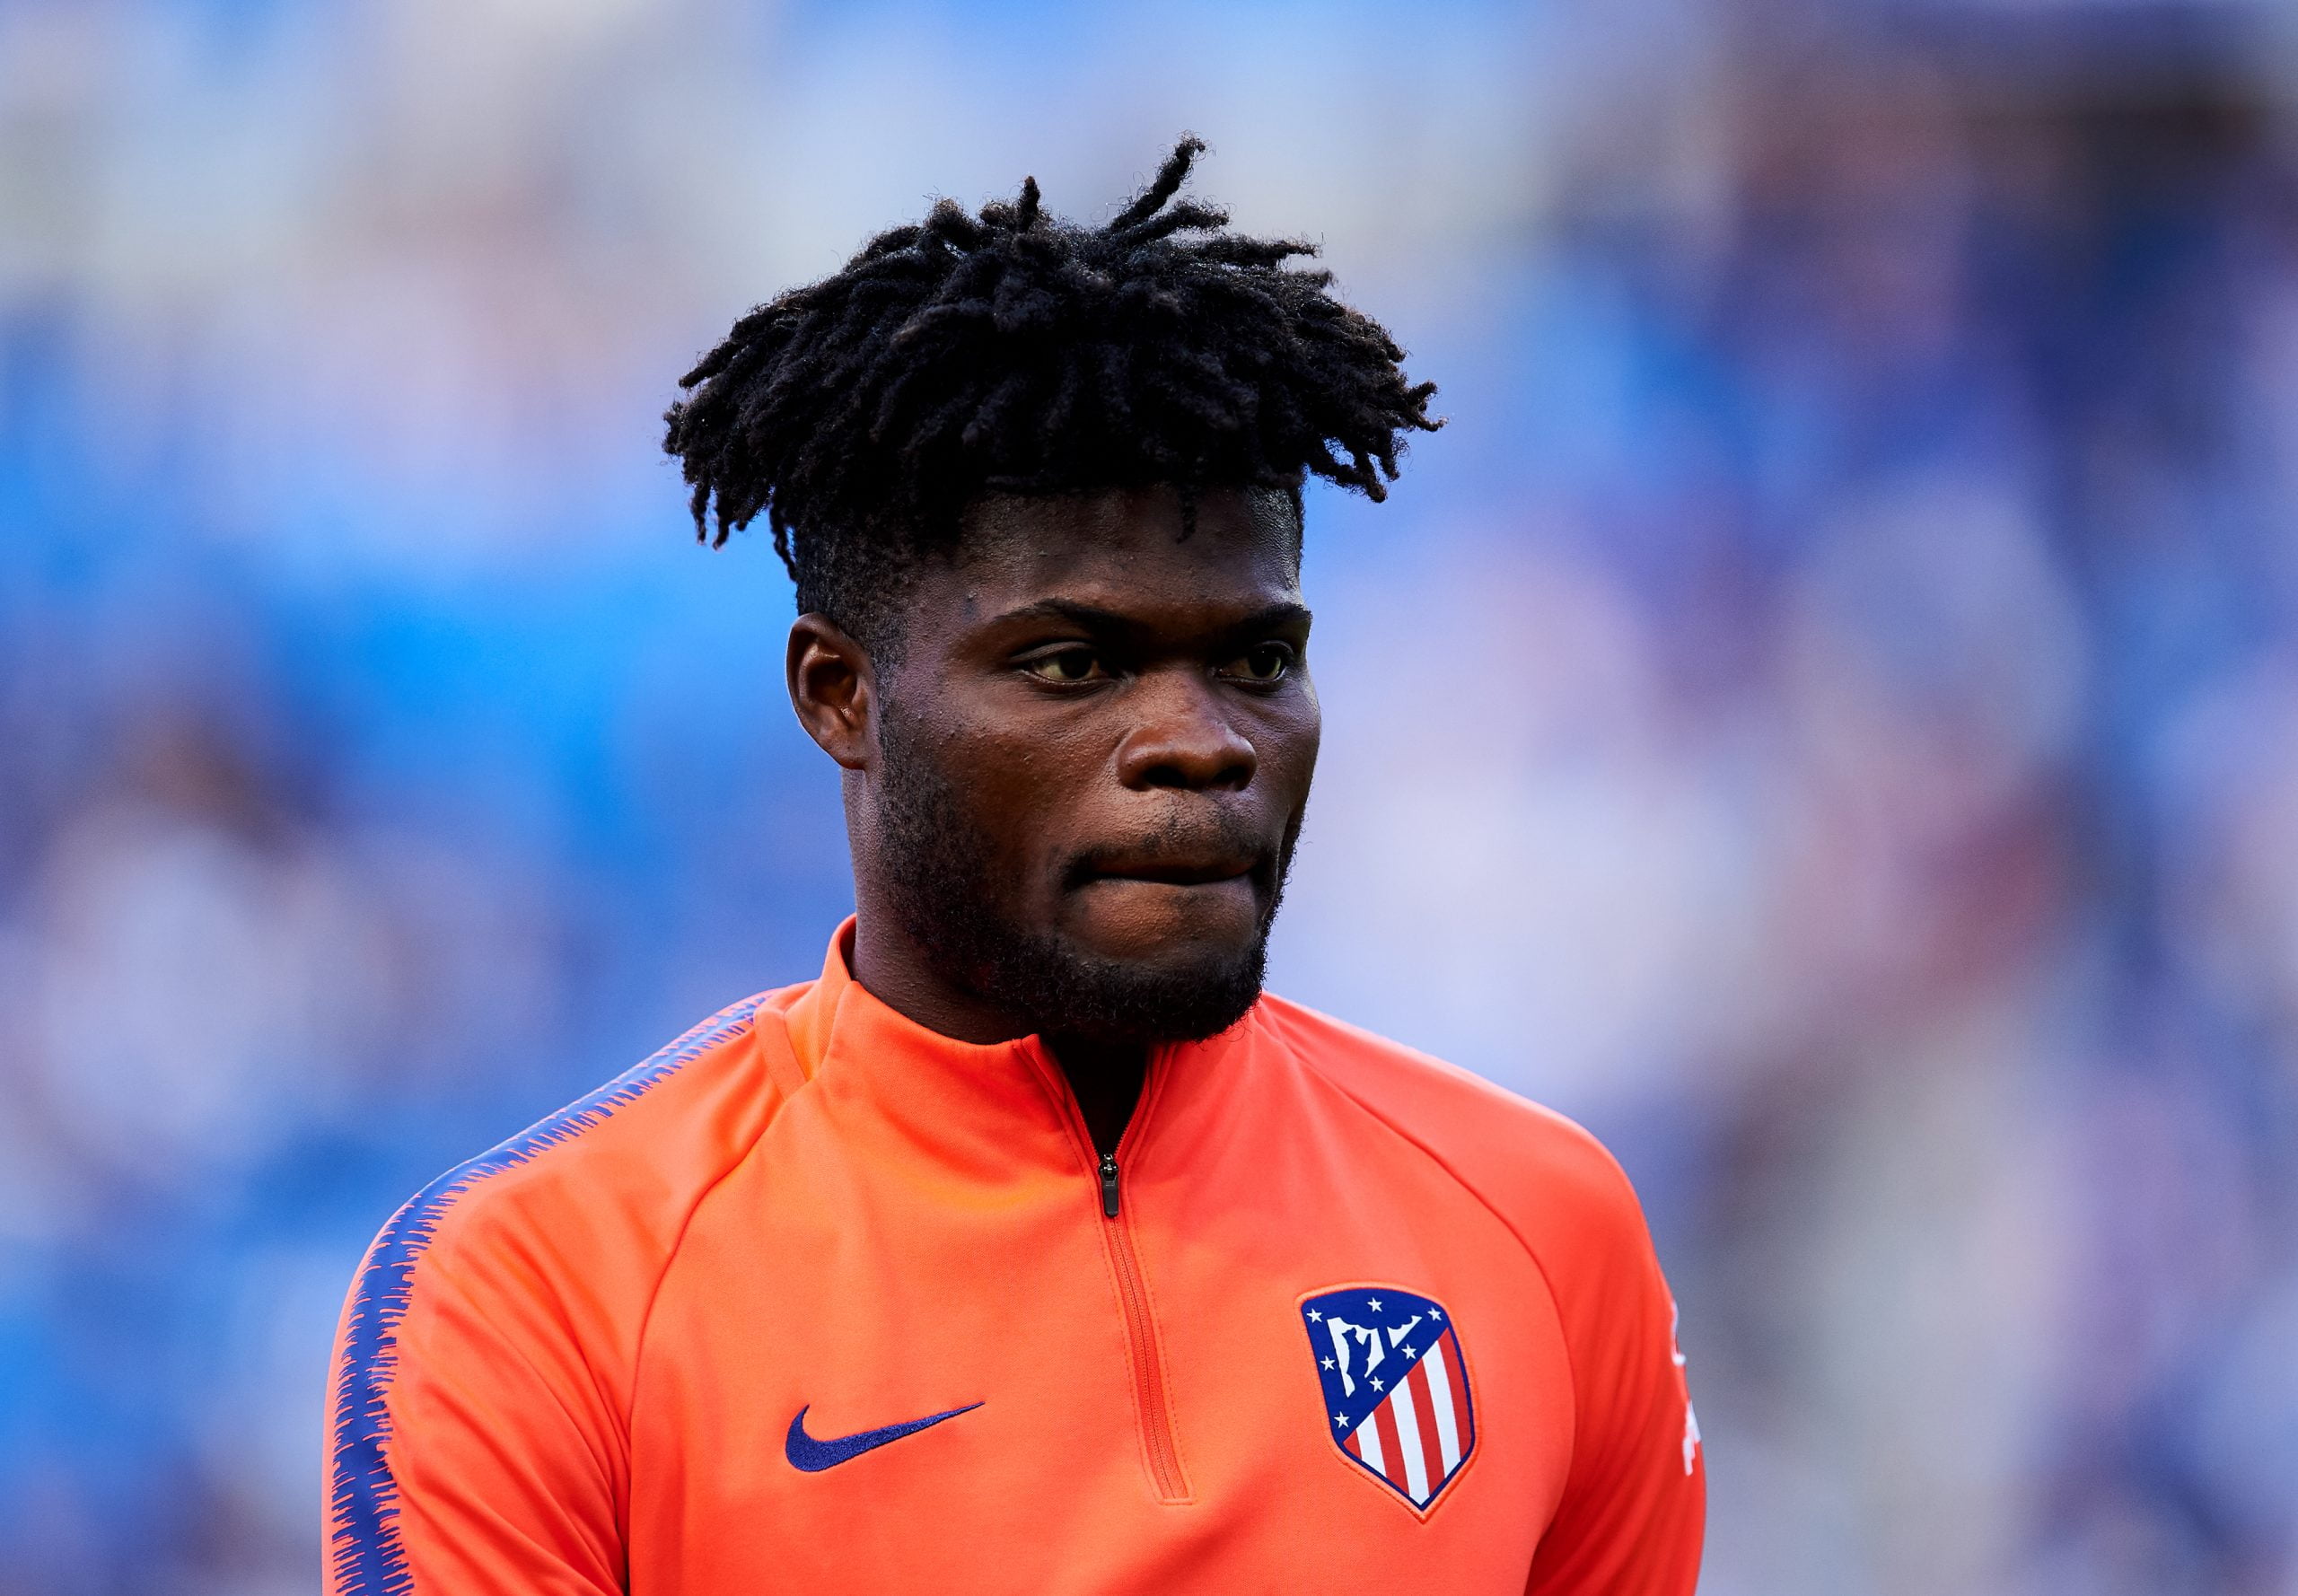 Arsenal prepared to triple Thomas Partey's wages this summer (Partey is deep in thought in the photo)